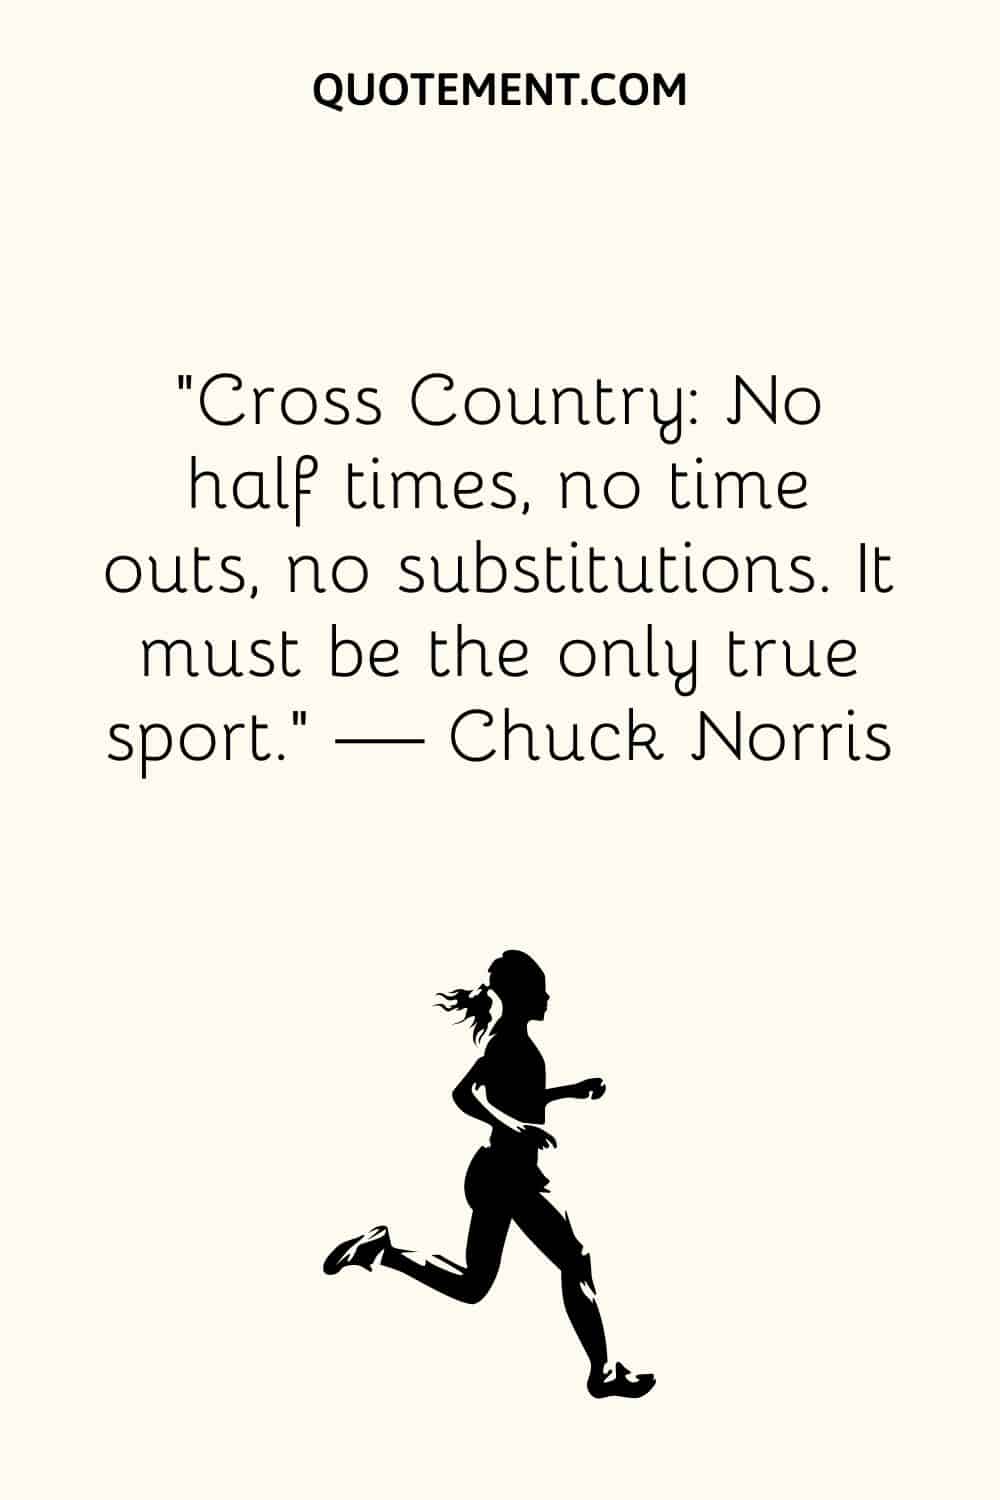 girl running image representing cross country quote